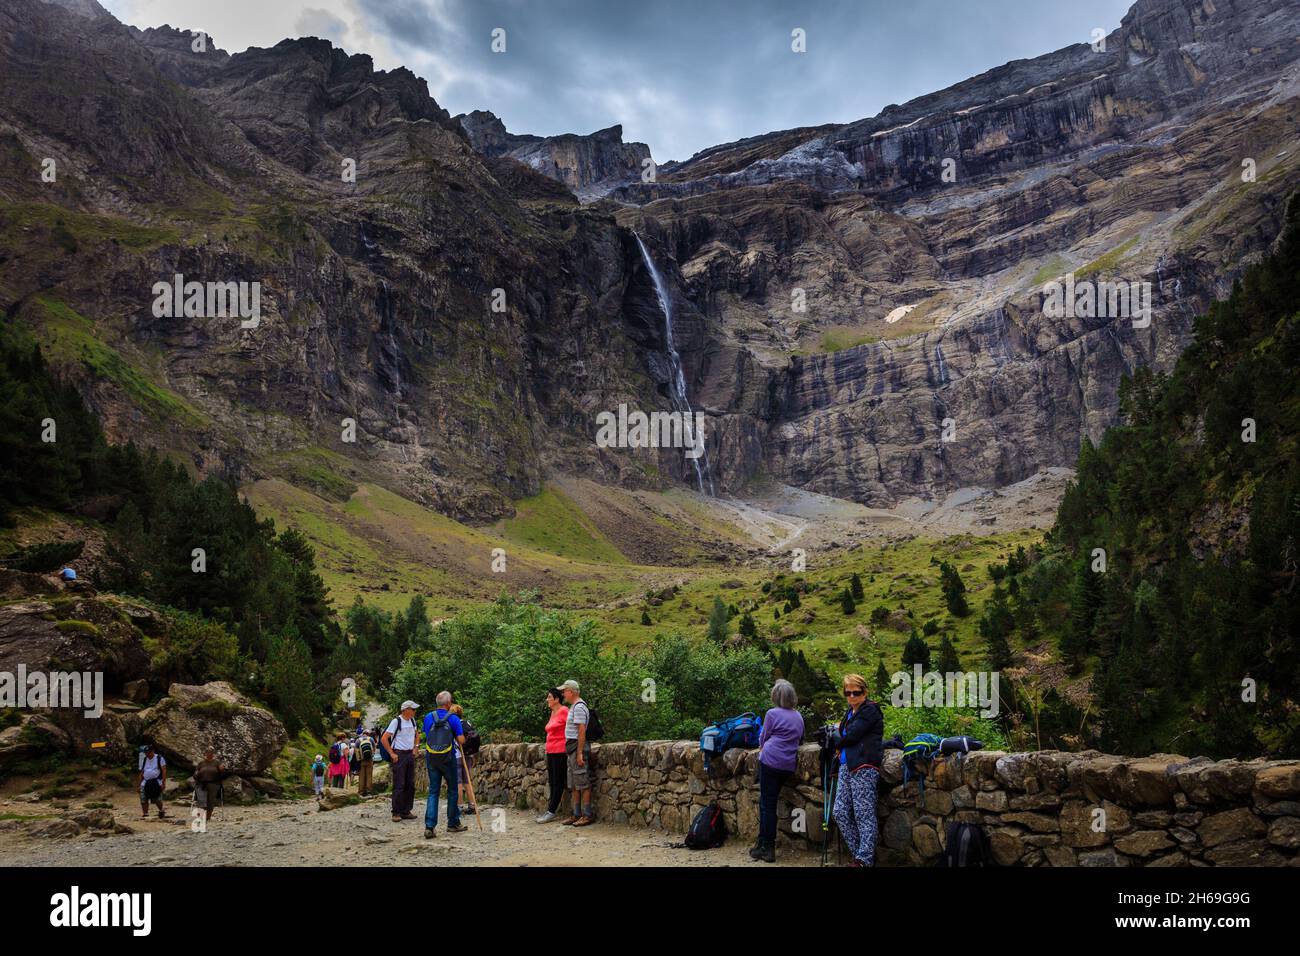 Hikers walk in the Cirque de Gavarnie in the French Pyrenees National Park, a UNESCO World Heritage Site. A large waterfall dominates the  cirque. Stock Photo